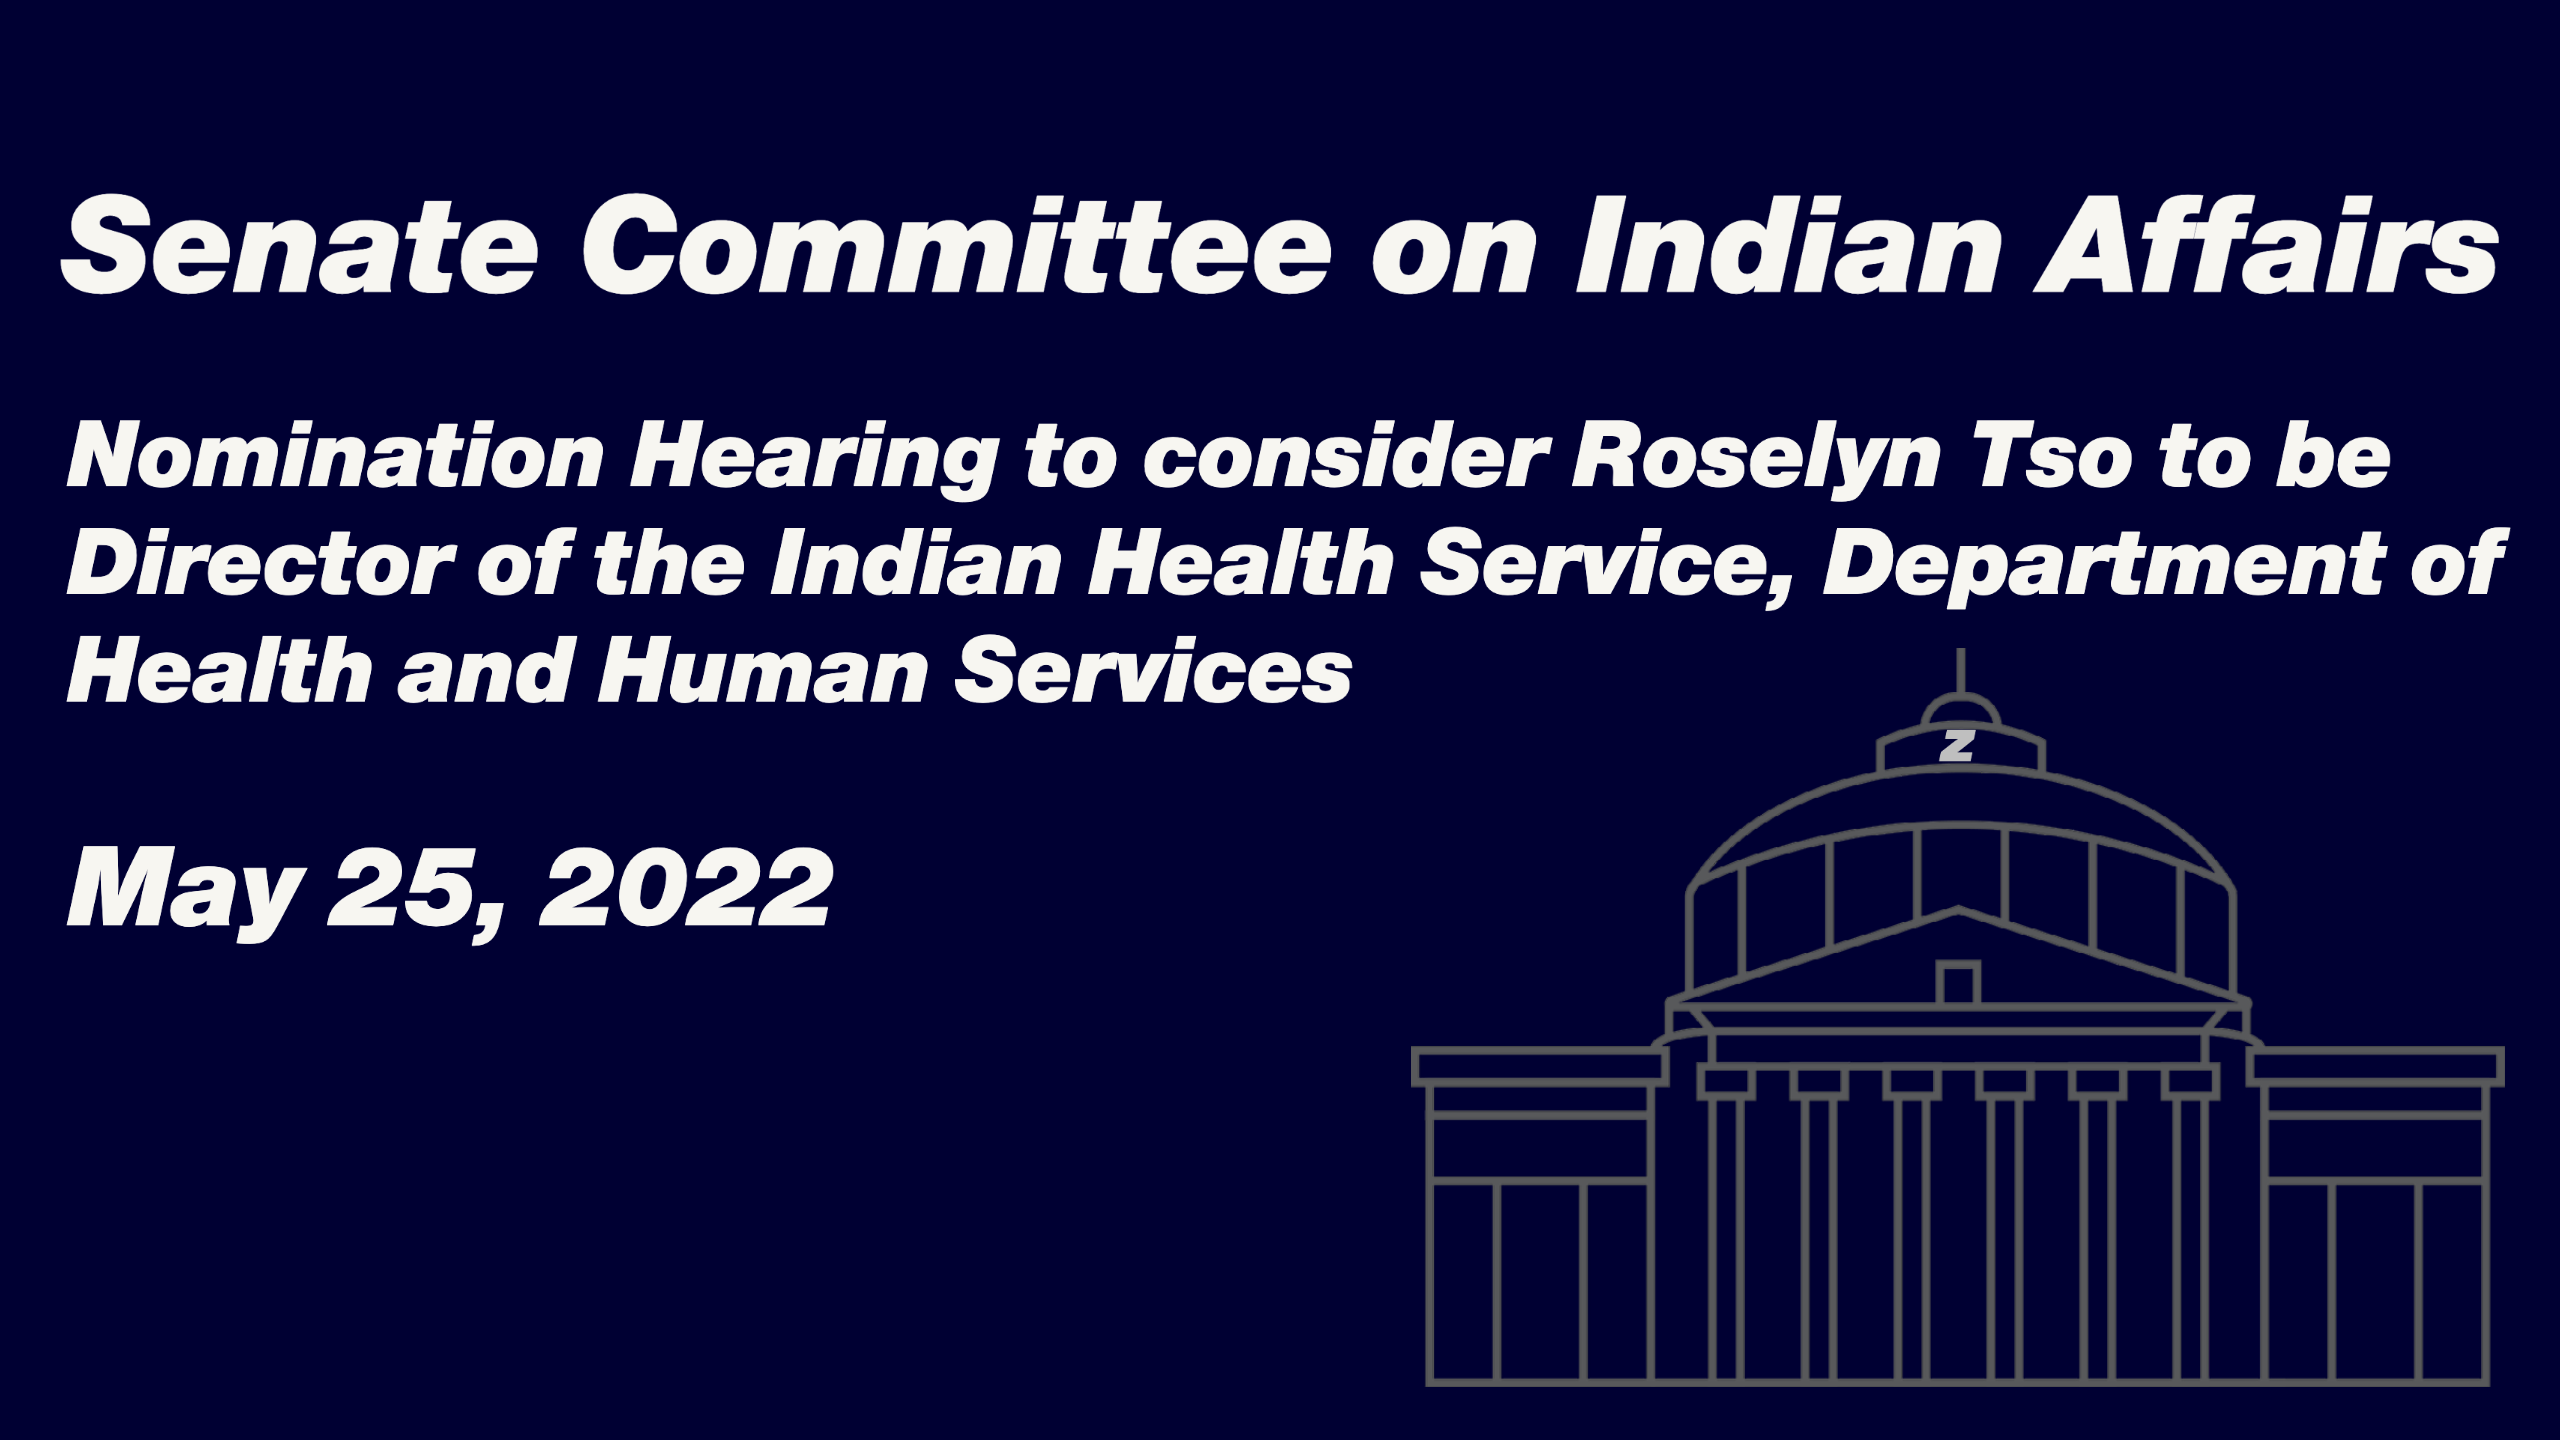 Nomination Hearing to consider Roselyn Tso to be Director of the Indian Health Service, Department of Health and Human Services